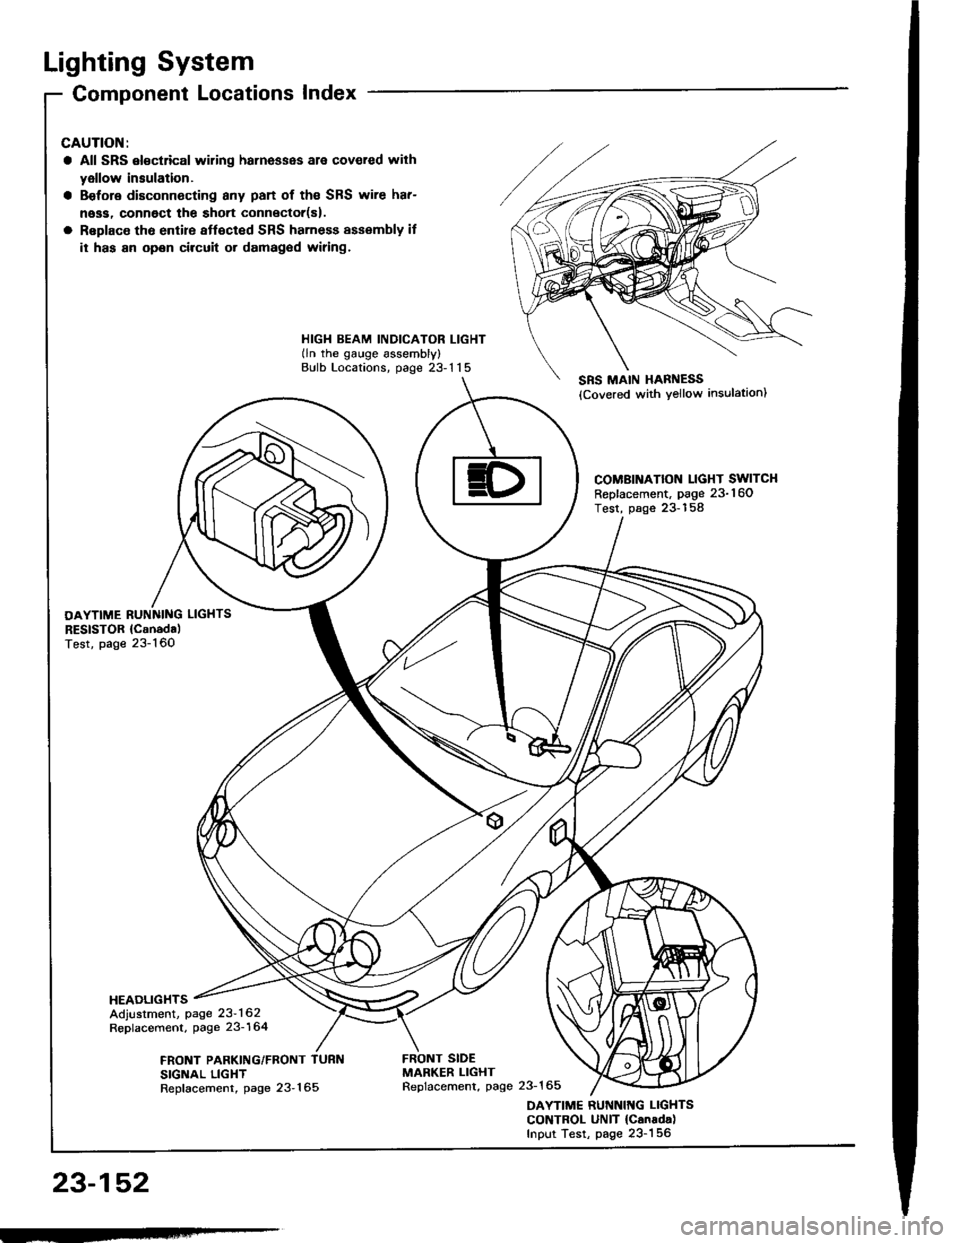 HONDA INTEGRA 1994 4.G Workshop Manual Lighting System
OAYTIMERESISTOR lC.nodalTest, page 23-160
HEAOLIGHTSAdjustment, page 23-162Replacement, page 23-164
Component Locations Index
All SRS el€ctrical wiring harnesses ale covered with
yal